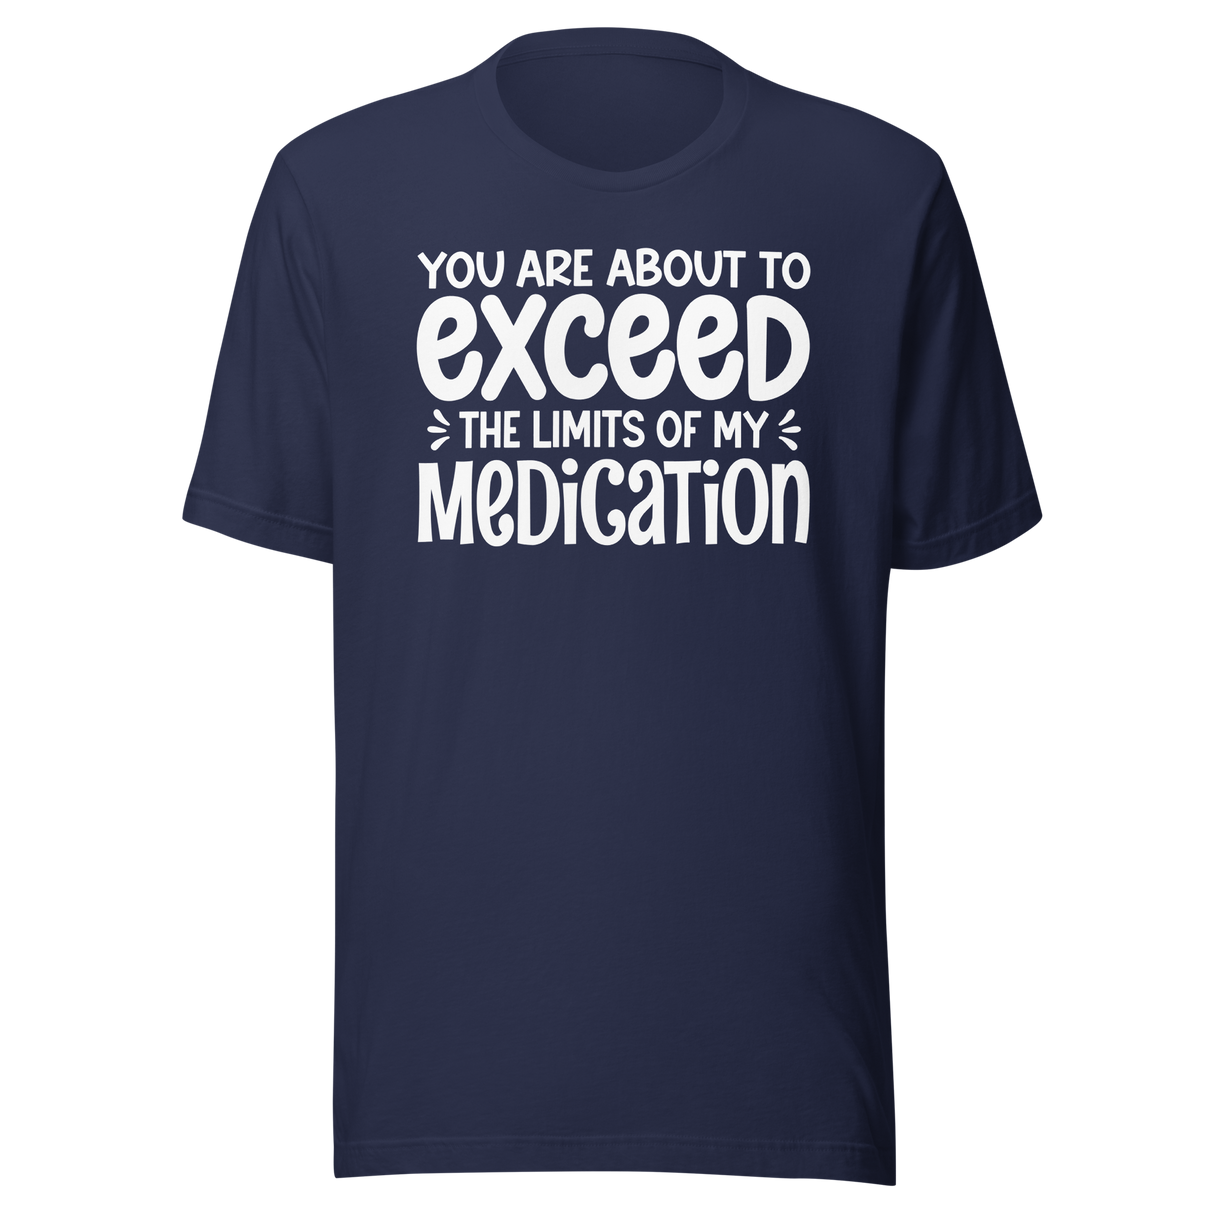 you-are-about-to-exceed-the-limits-of-my-medication-funny-tee-laughter-t-shirt-humor-tee-comedy-t-shirt-hilarious-tee#color_navy